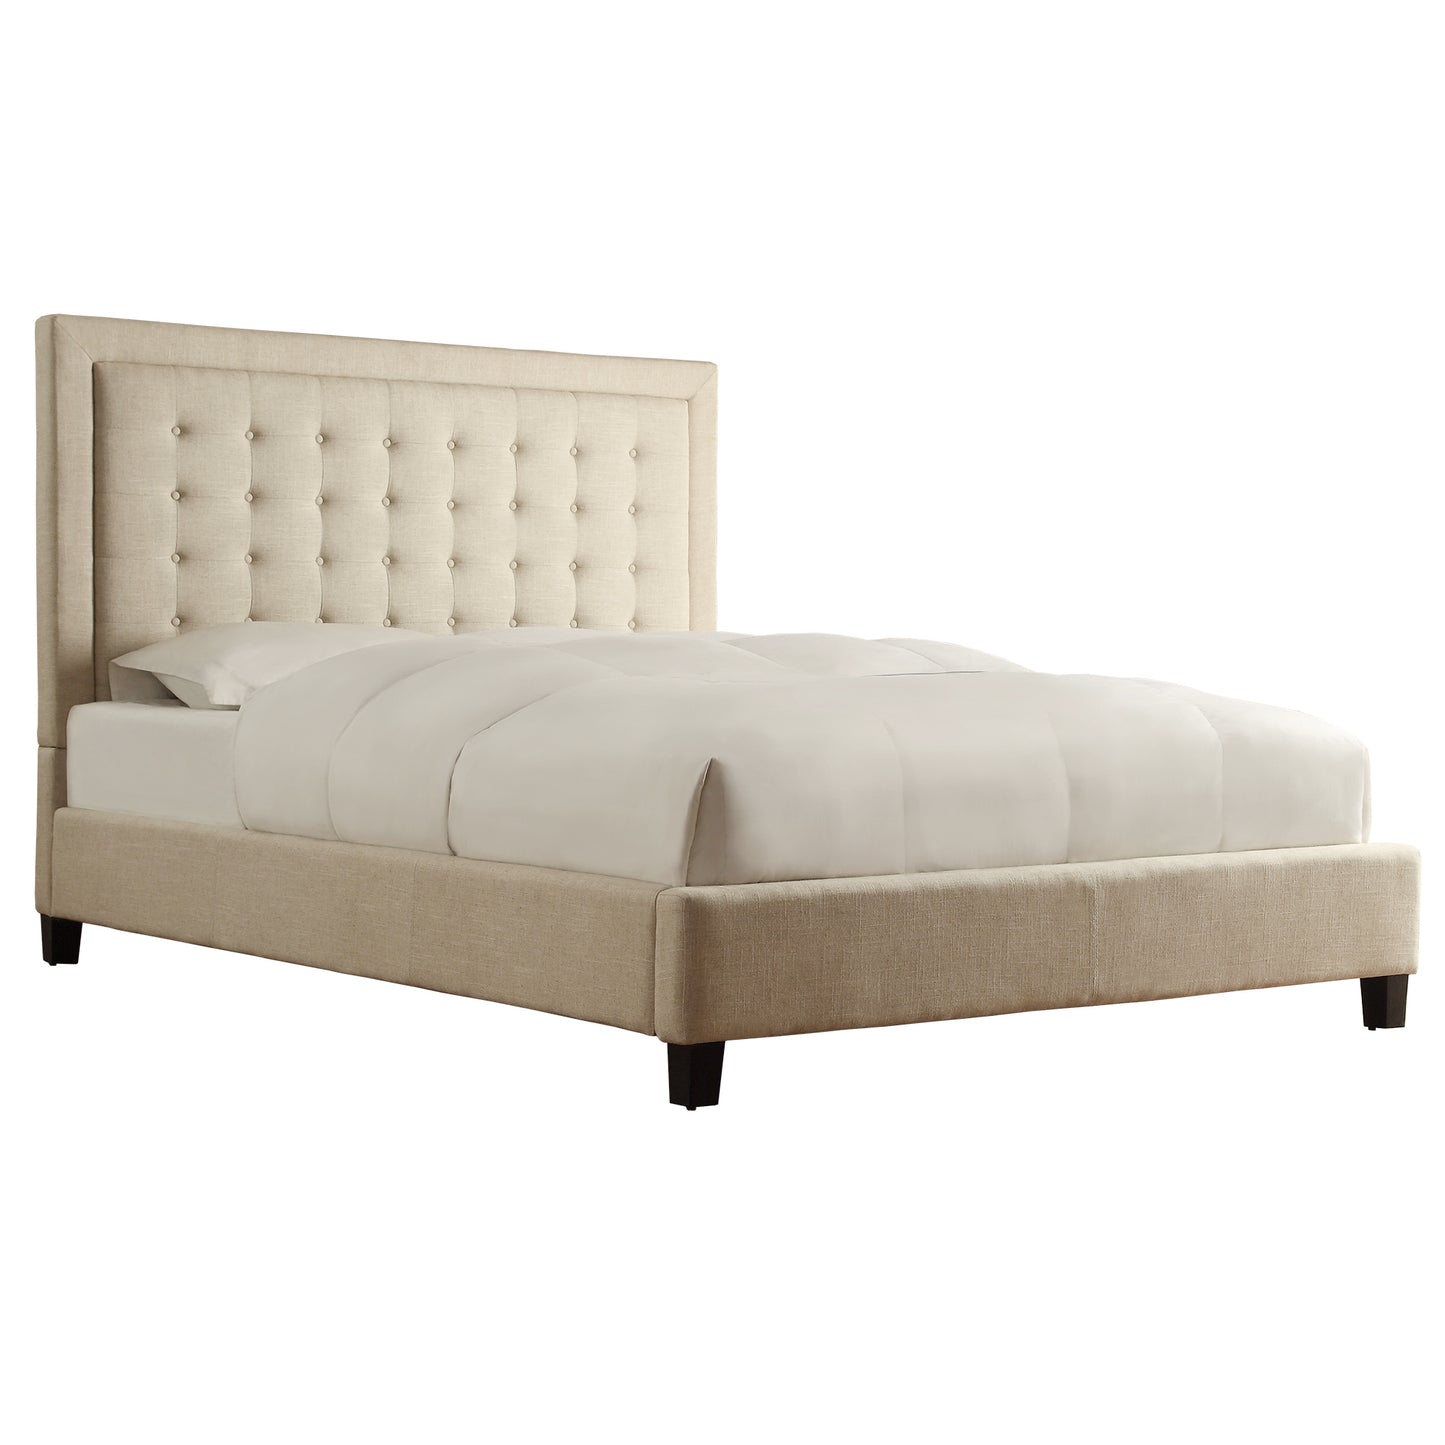 Square Button-Tufted Upholstered Platform Bed - Beige, Queen